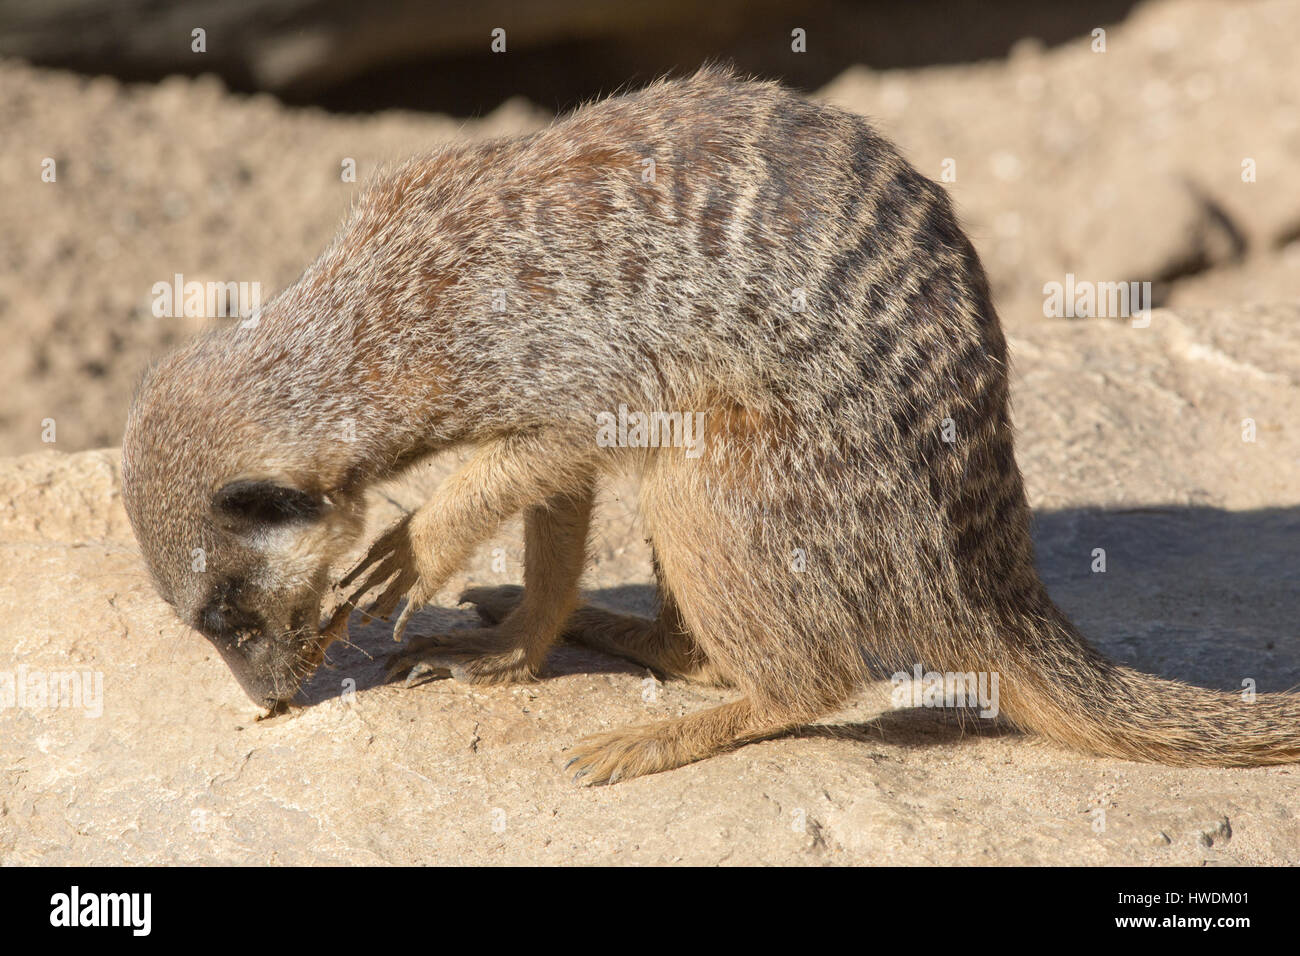 Meerkat (Suricata suricatta). Curious and inquisitive. Native to the deserts of southwestern Africa. Stock Photo